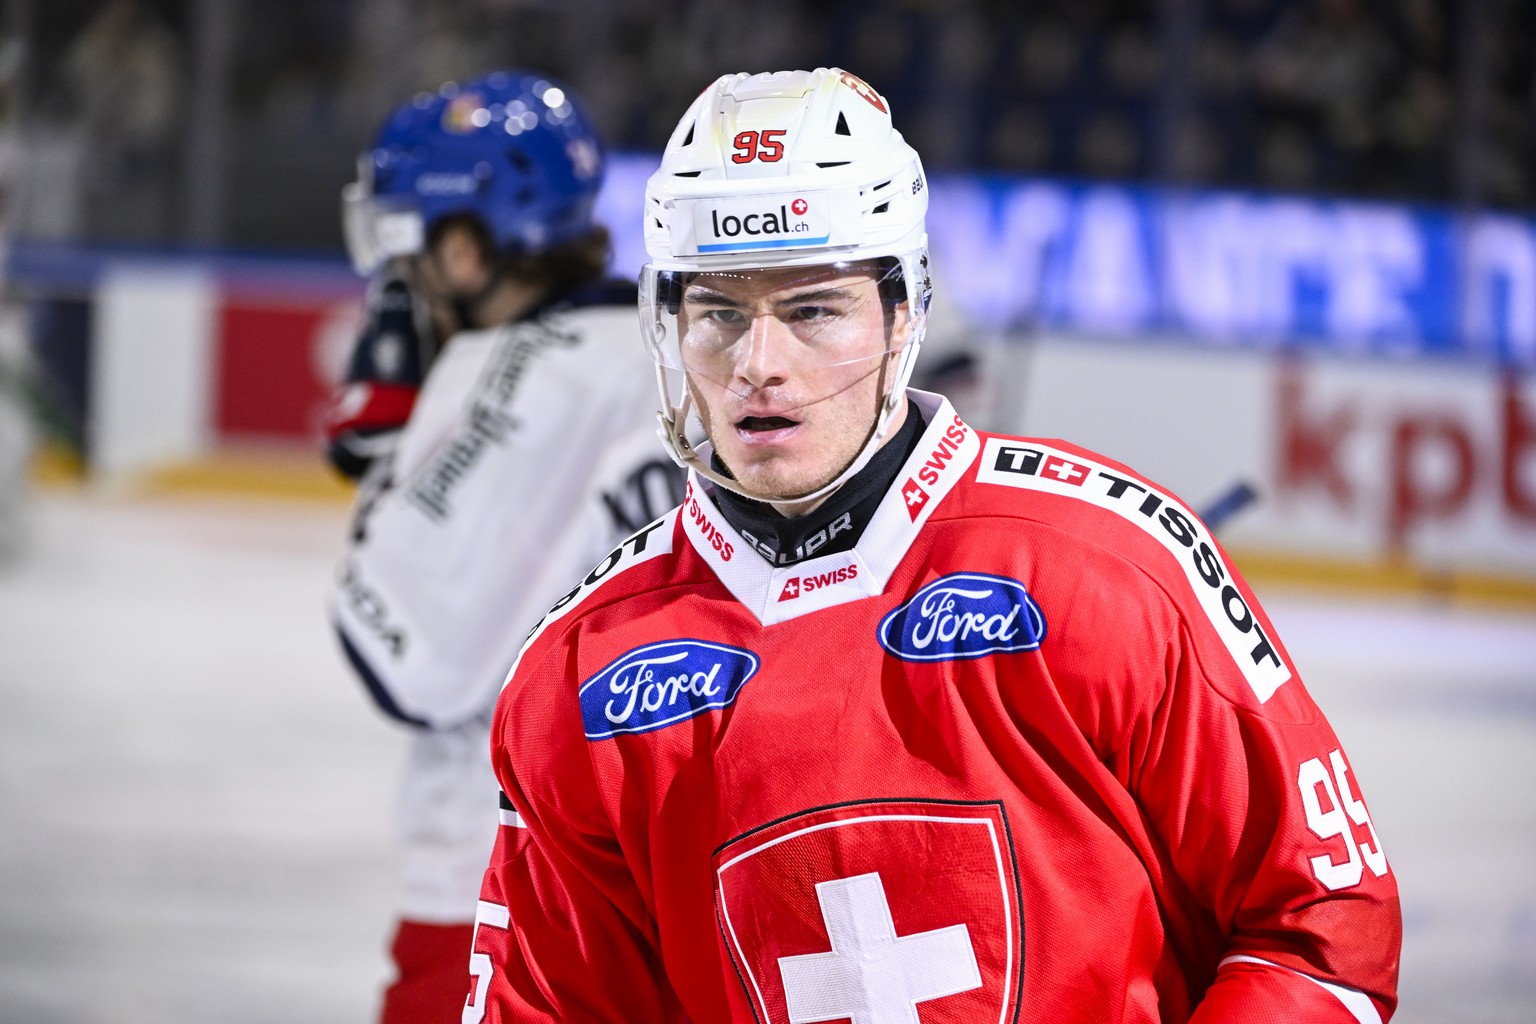 Switzerland&#039;s Tyler Moy reacts after scoring during the Beijer Hockey Games (Euro Hockey Tour) ice hockey match between Switzerland and the Czech Republic in L